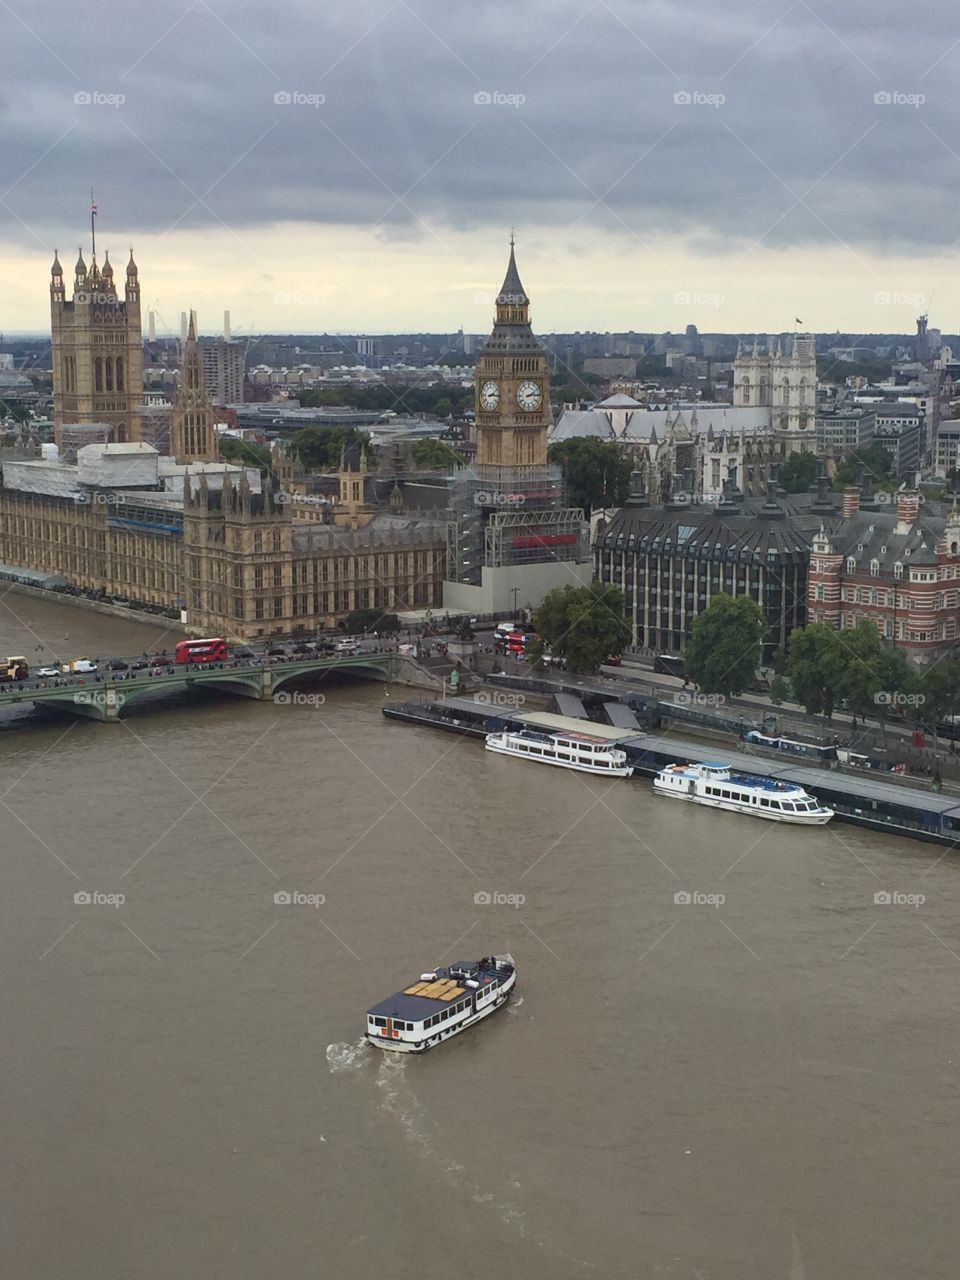 The boat processing towards its contemporaries . View from the London eye ! Truly London 